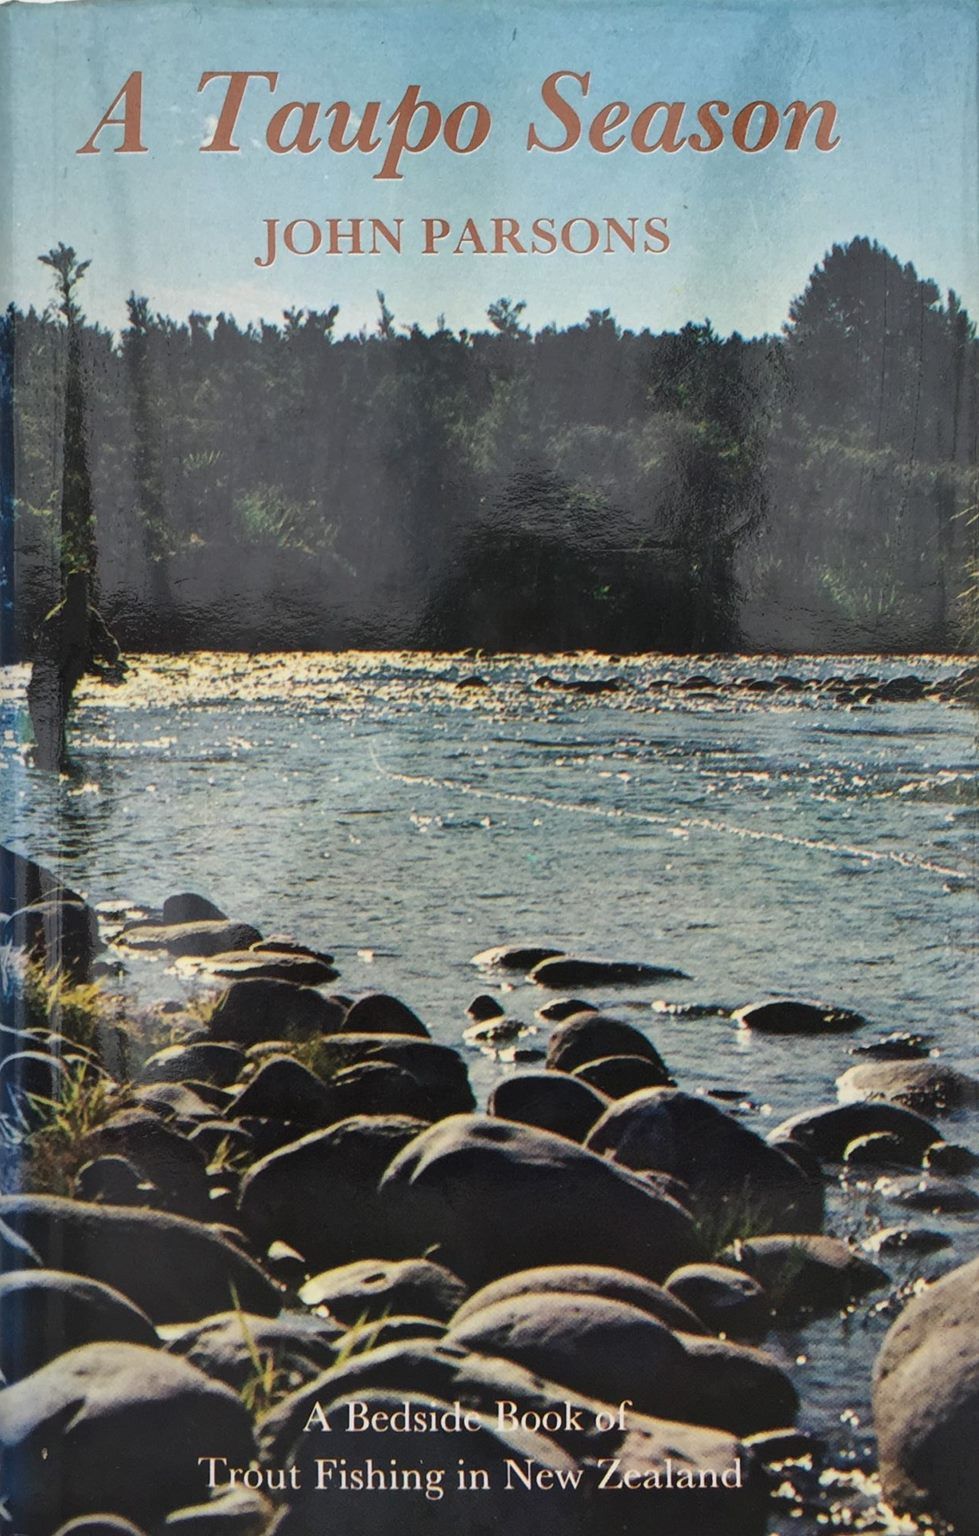 A TAUPO SEASON: A Bedside Book of Trout Fishing In New Zealand